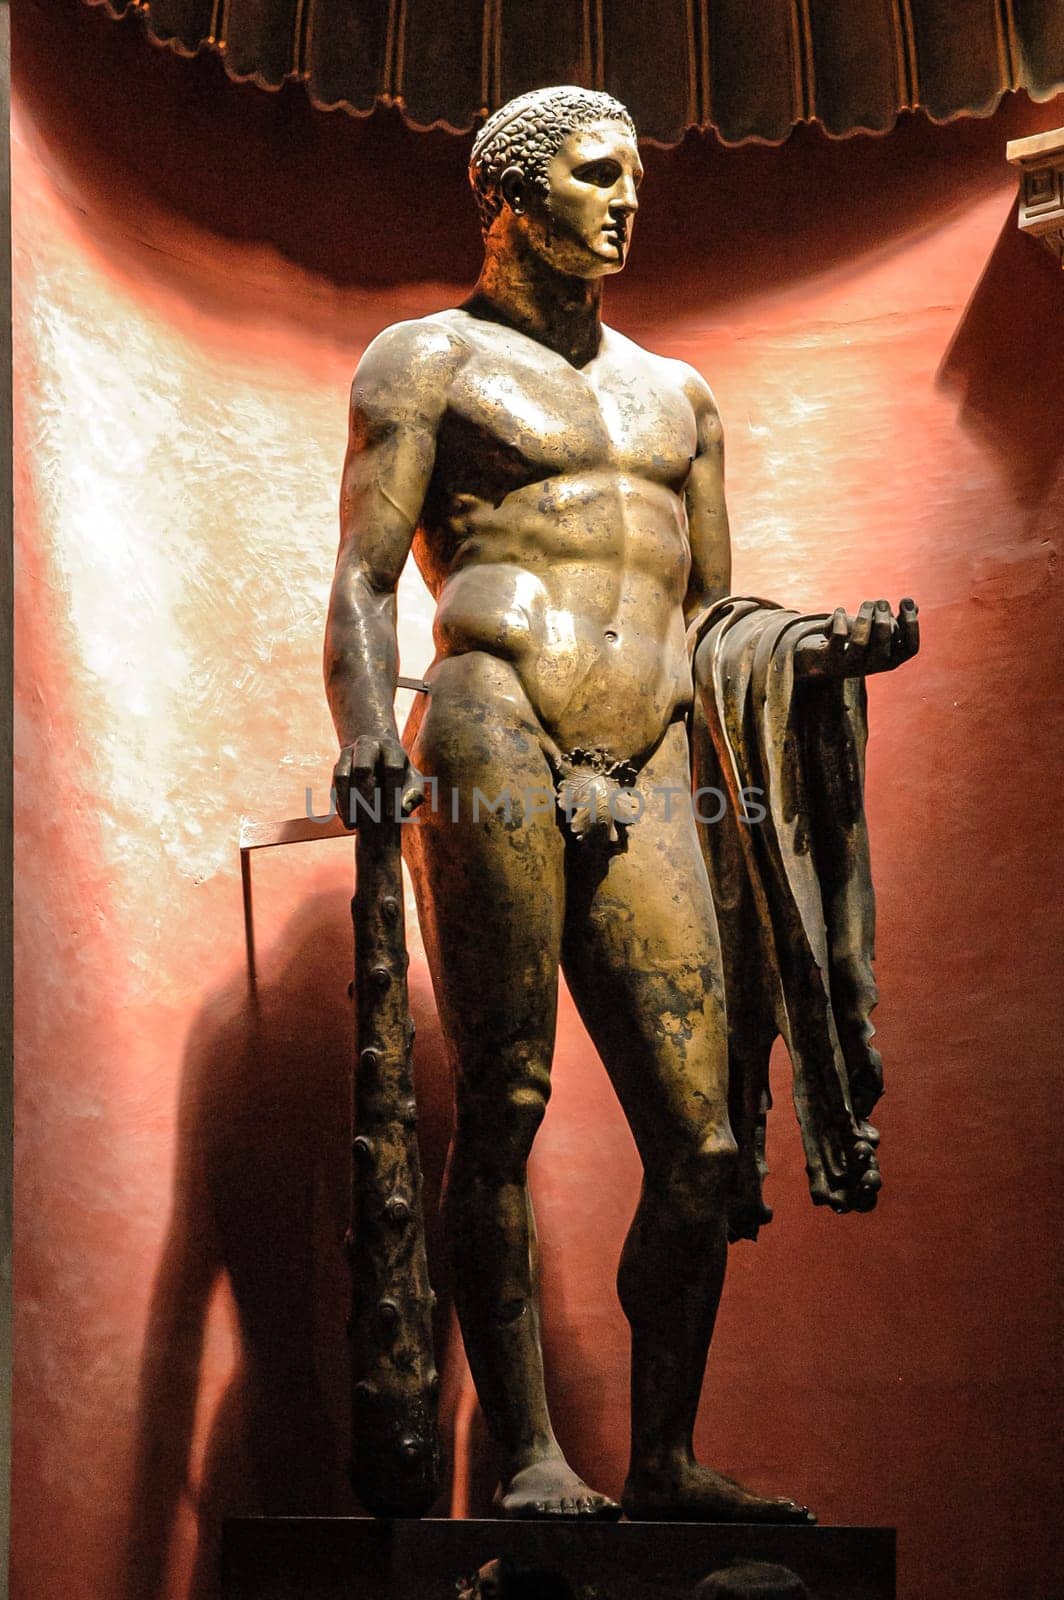 Vatican City, August 21, 2008: Statue of Hercules in gilded bronze carrying the mace and the skin of the Nemean lion. Century III AD. Pio Clementino Museum. Saint Peter Basilica